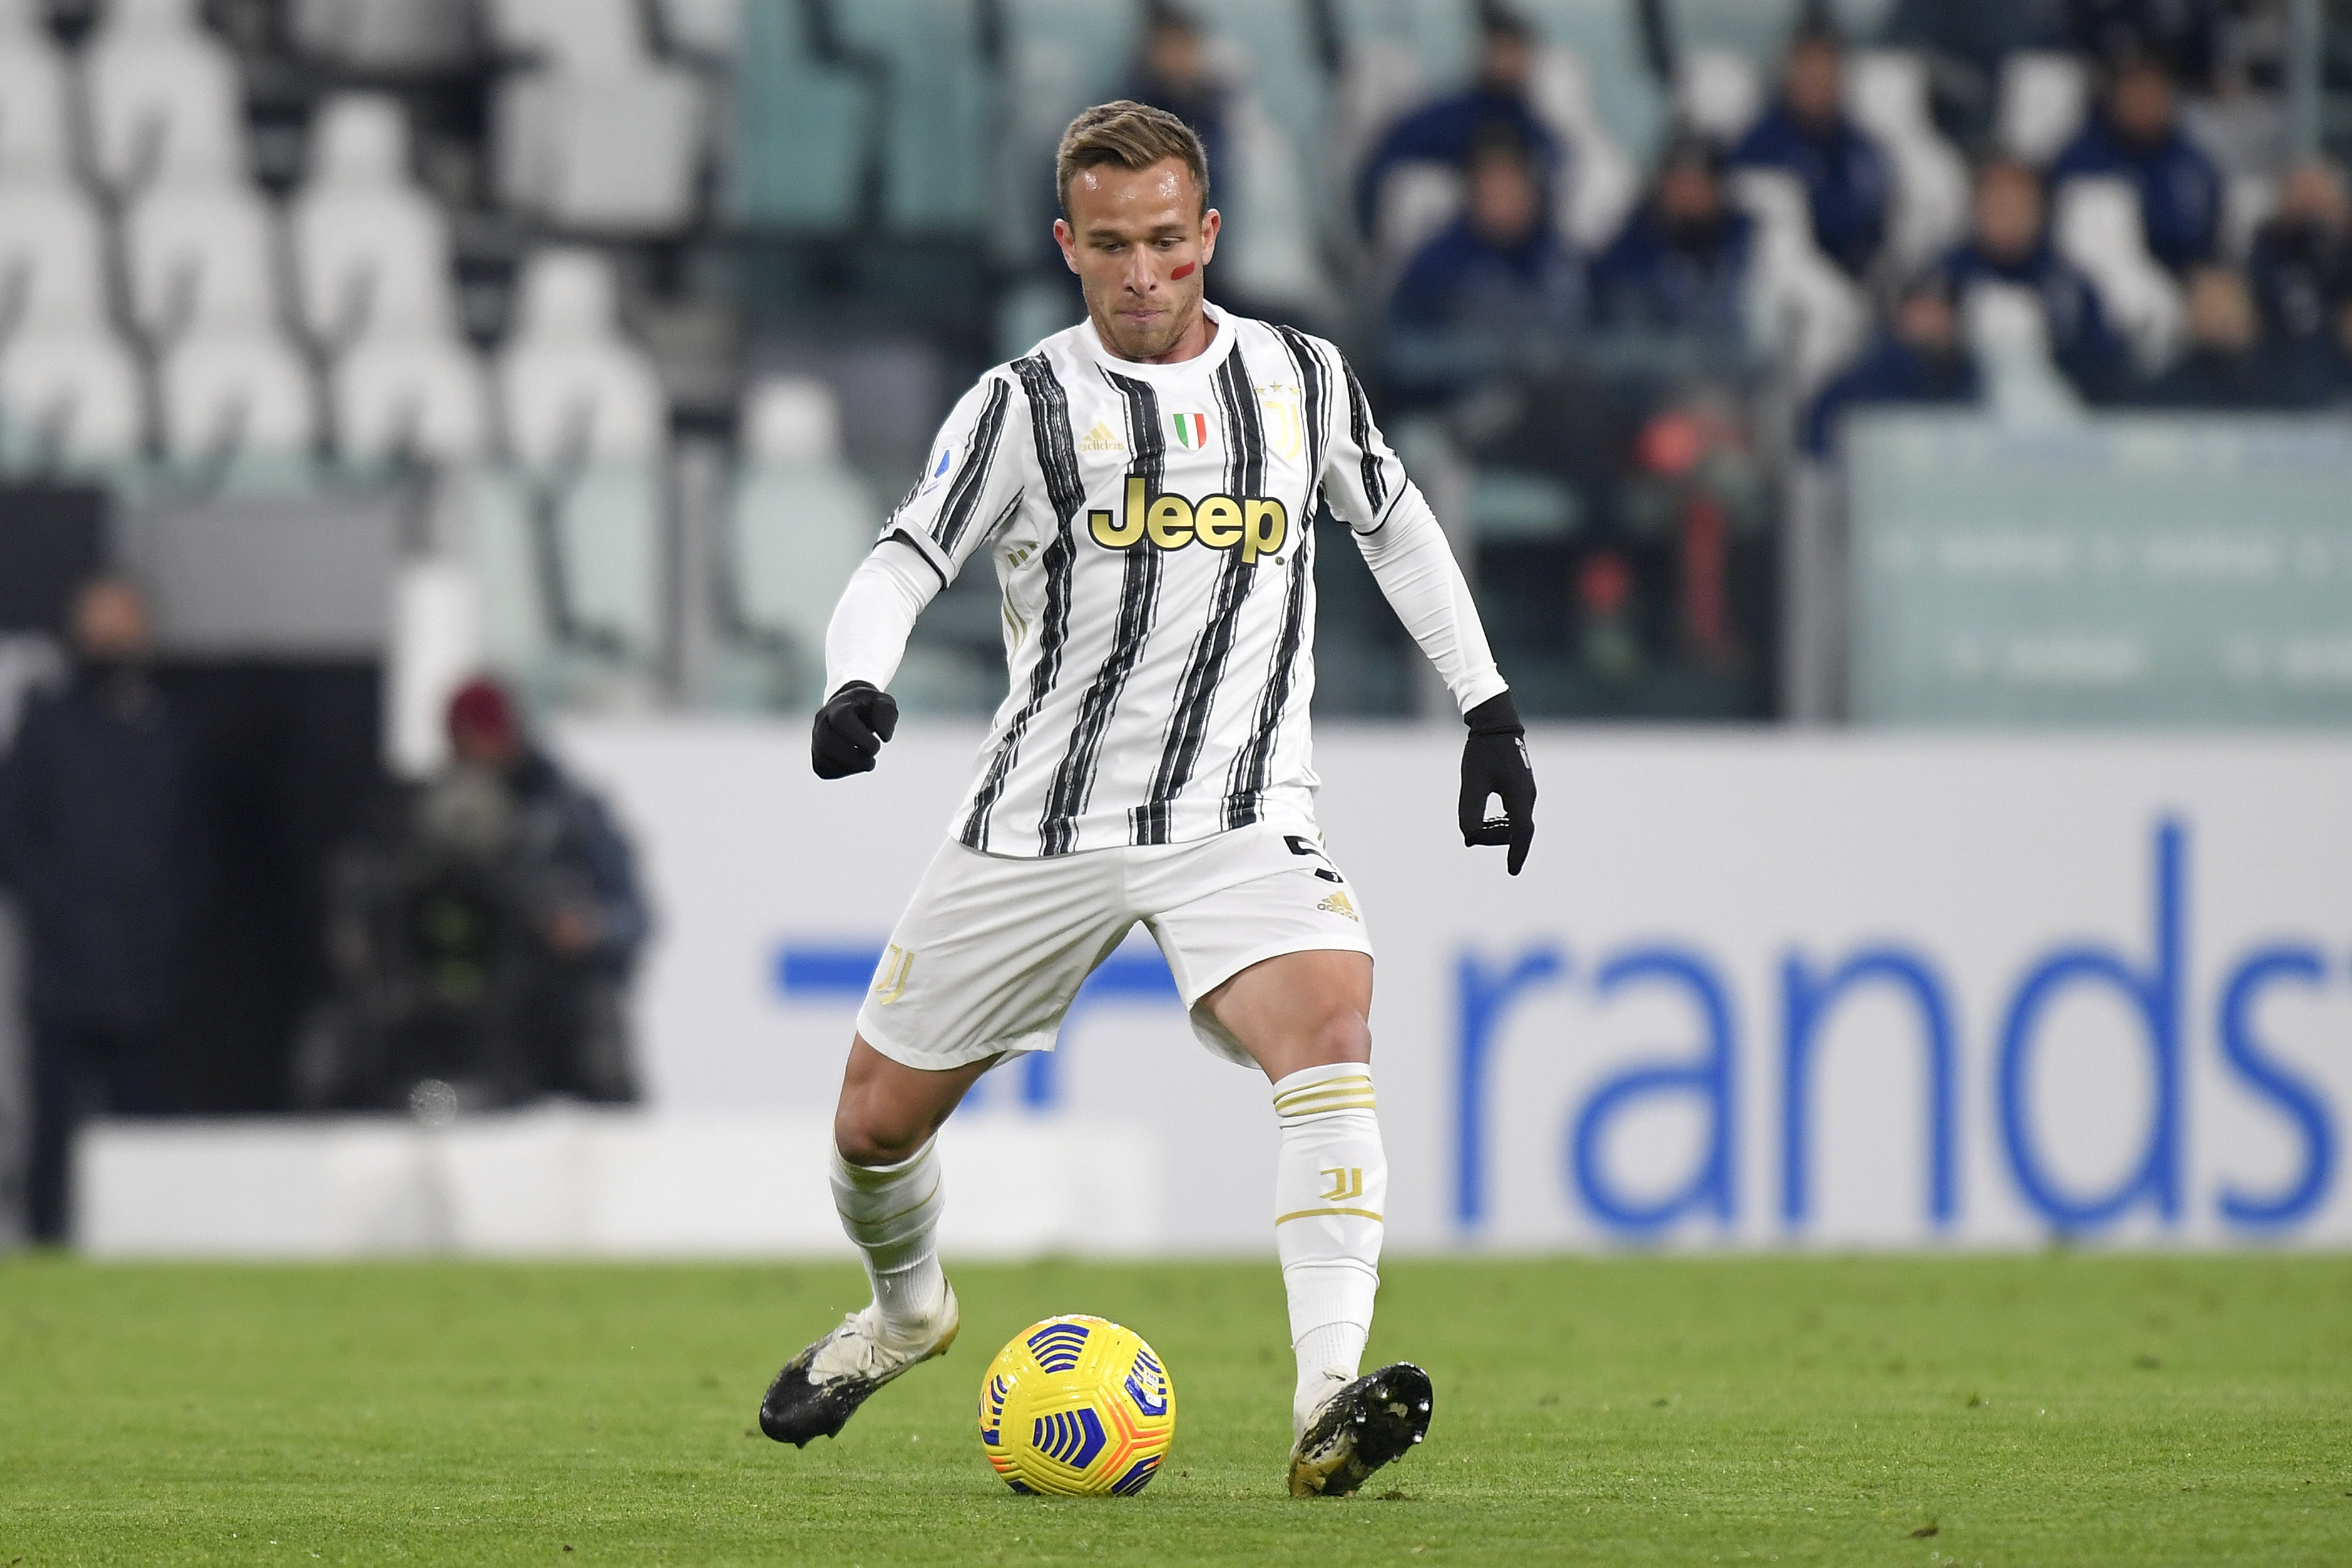 TURIN, ITALY - NOVEMBER 21: Arthur Melo of Juventus in action during the Serie A match between Juventus and Cagliari Calcio at Allianz Stadium on November 21, 2020 in Turin, Italy. (Photo by Filippo Alfero - Juventus FC/Juventus FC via Getty Images)